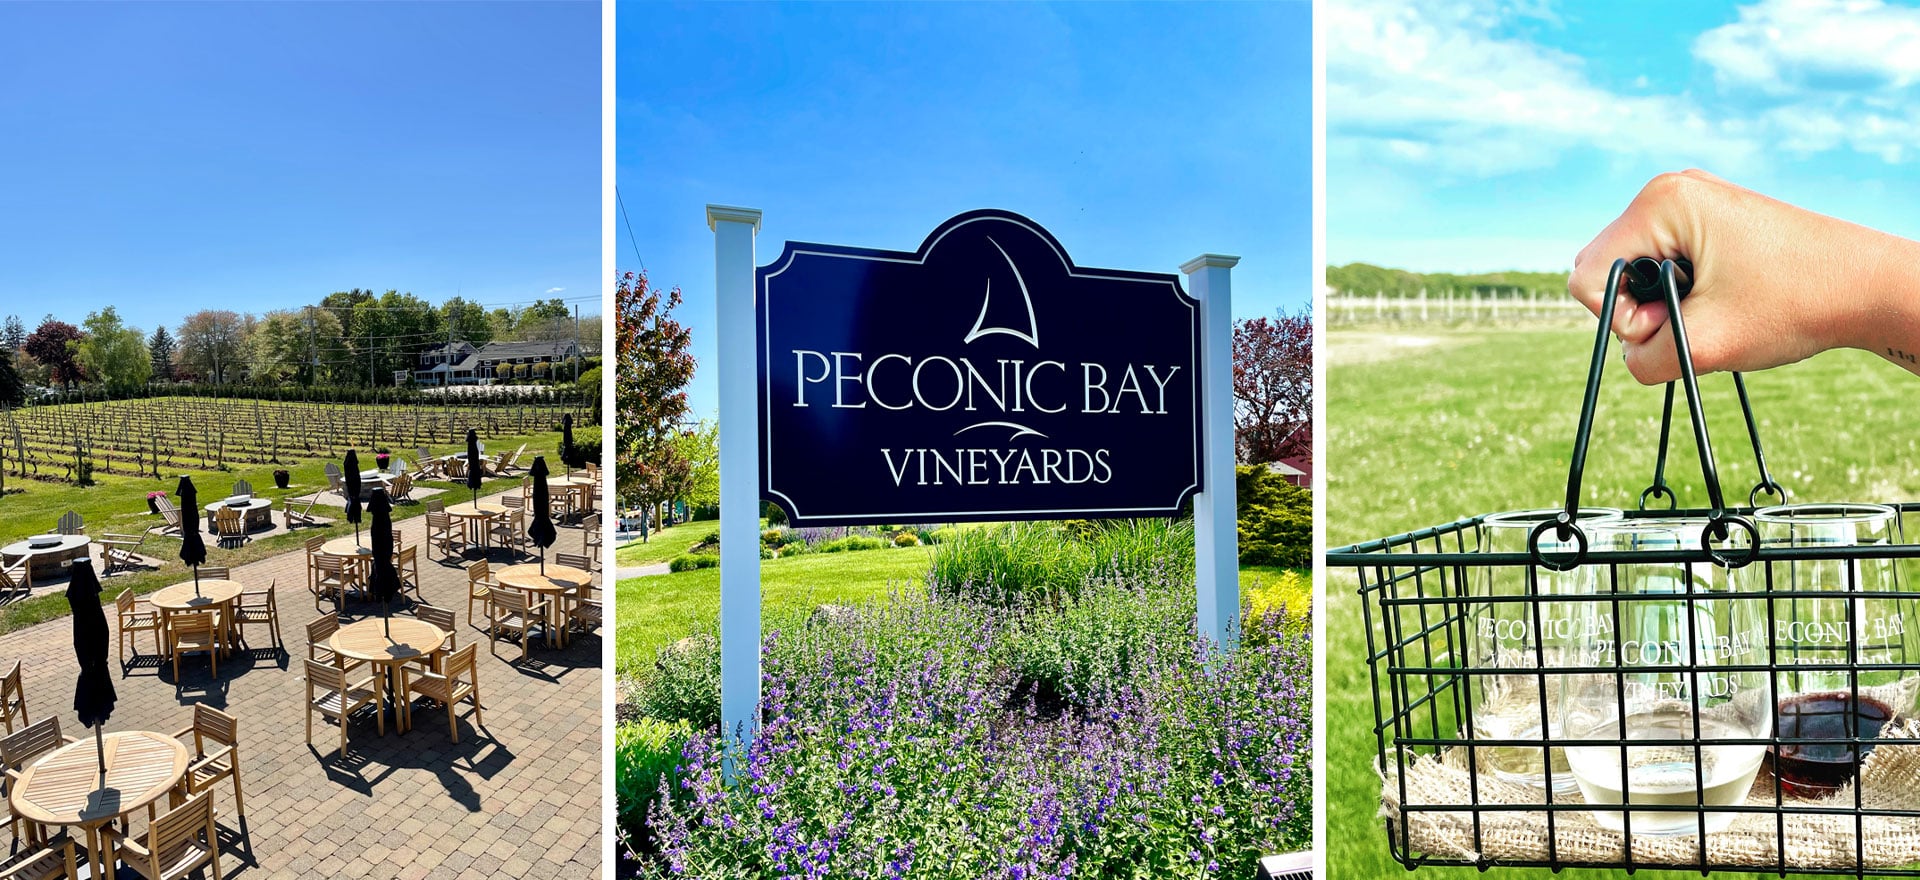 Peconic Bay Vineyards – 4 Stellar Wines and 4 Local Cheeses